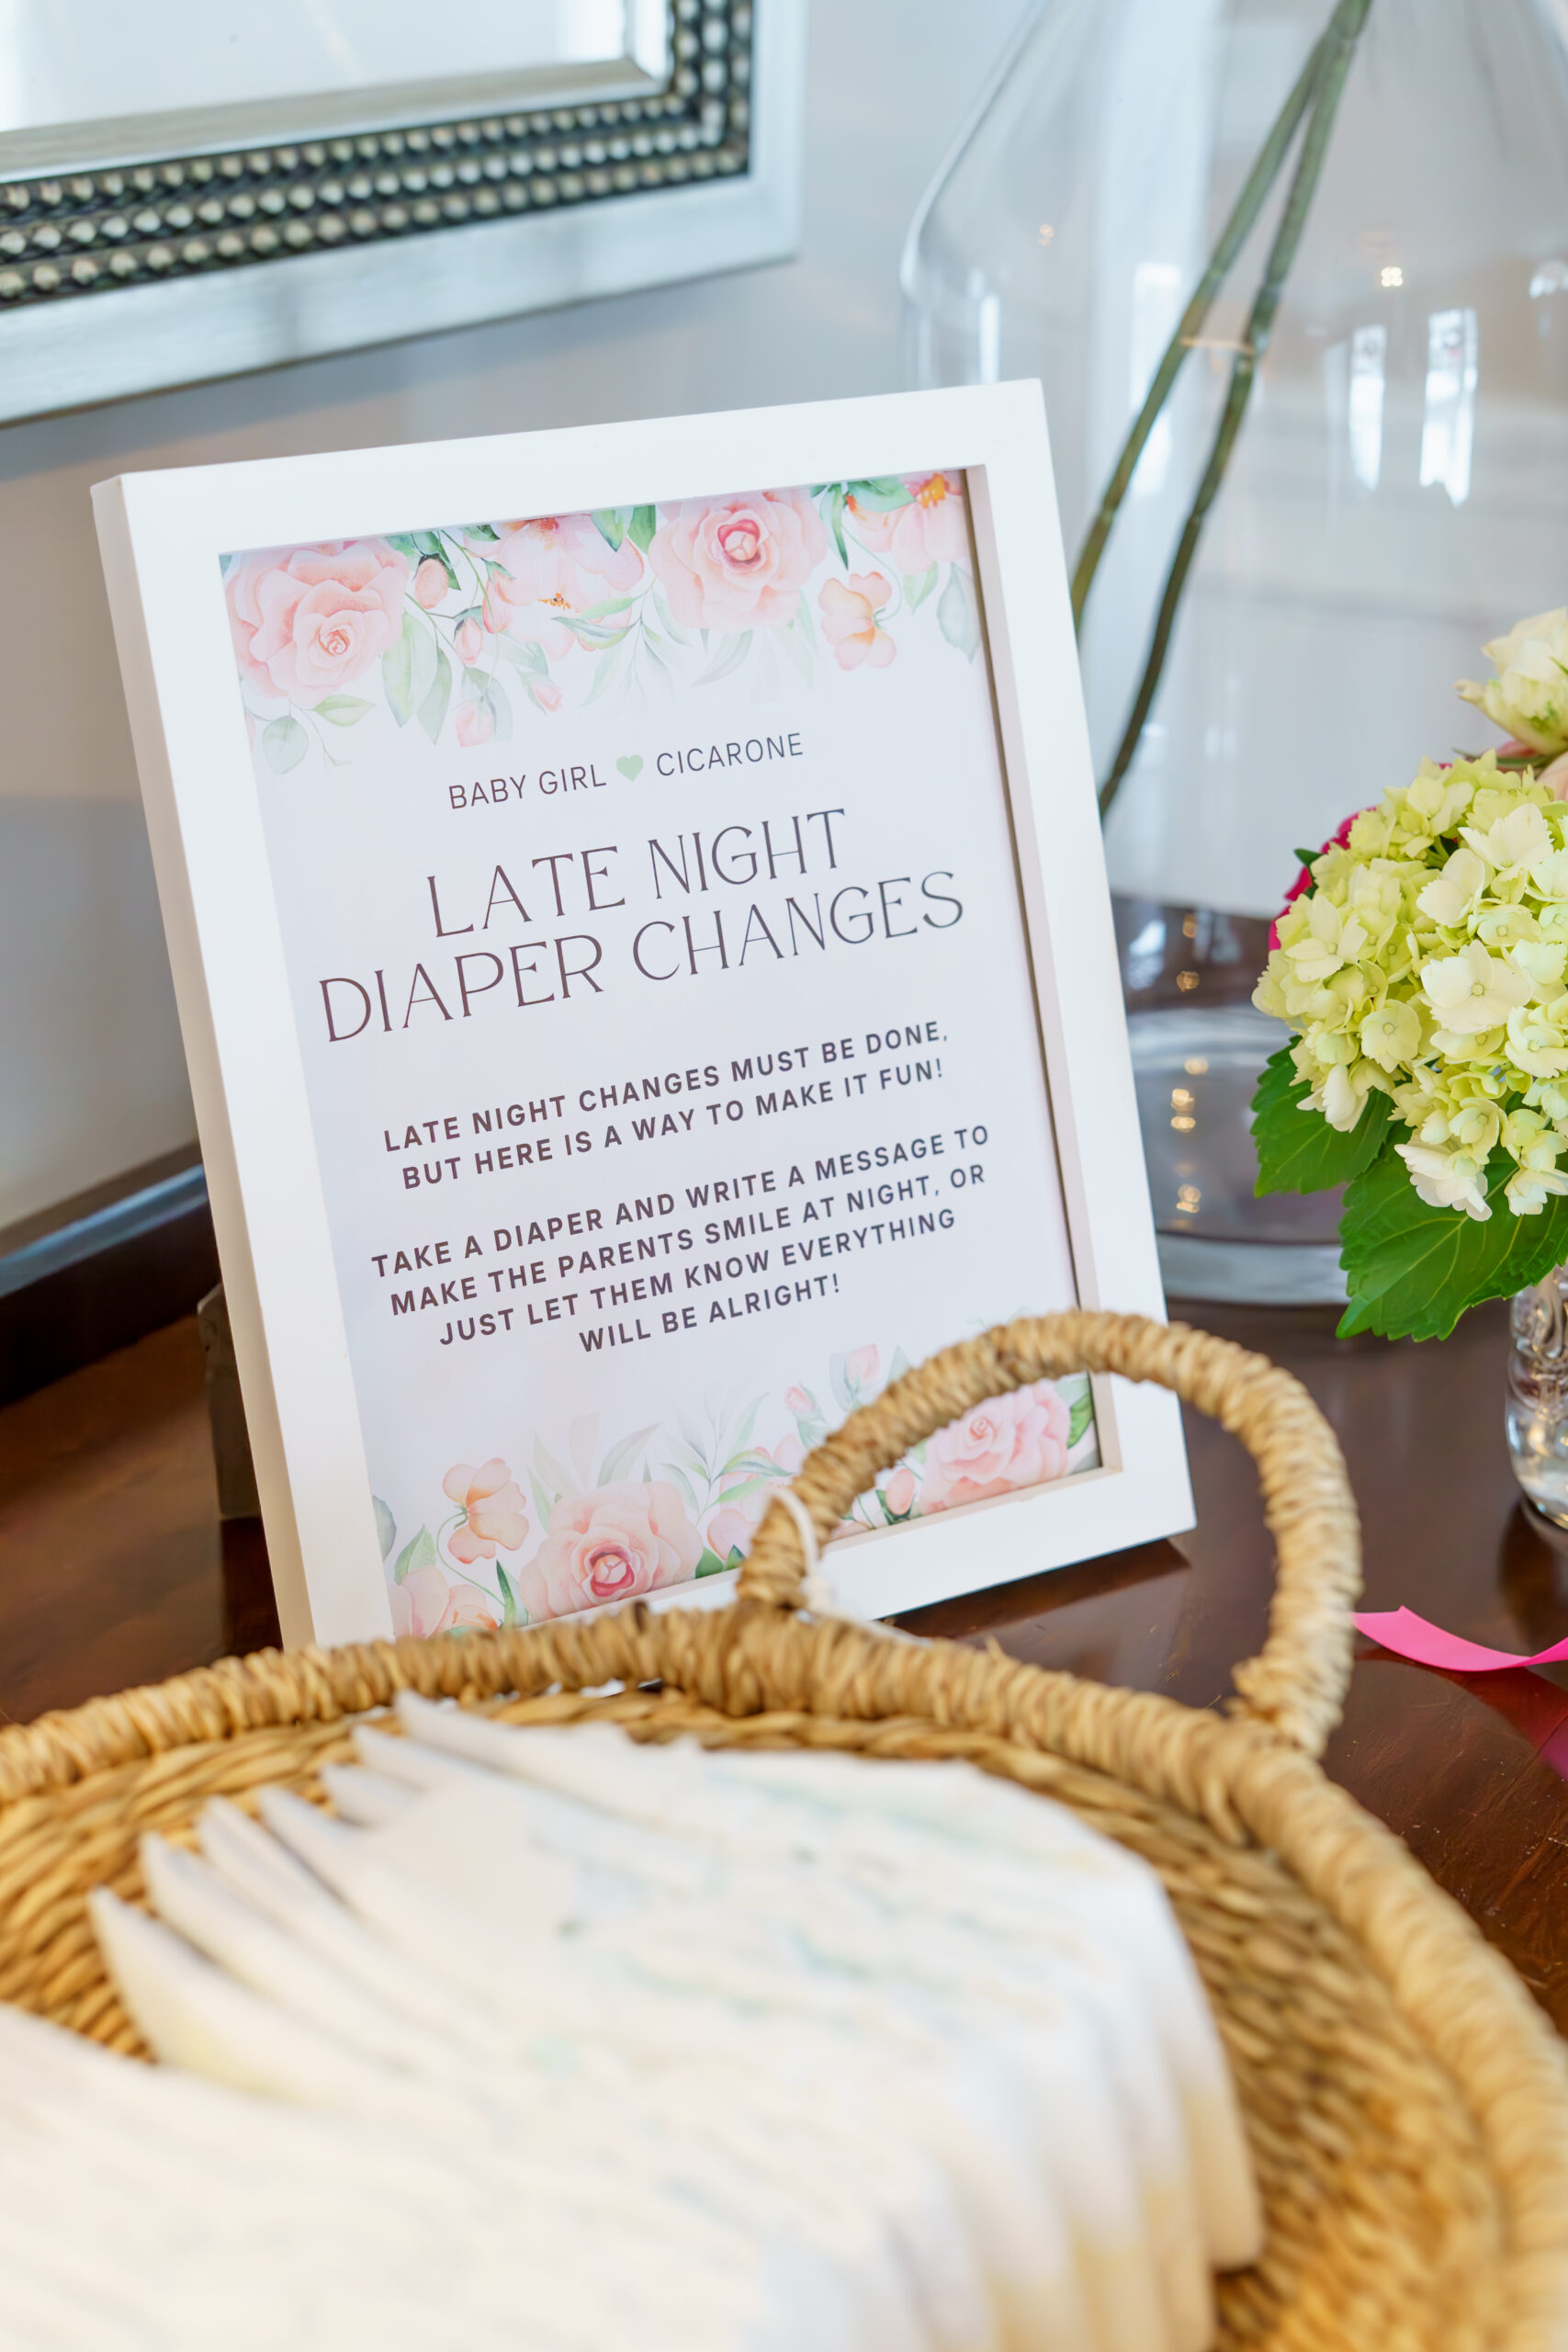 Baby Shower Activity - Leave Diaper Notes for Parents to Read Later